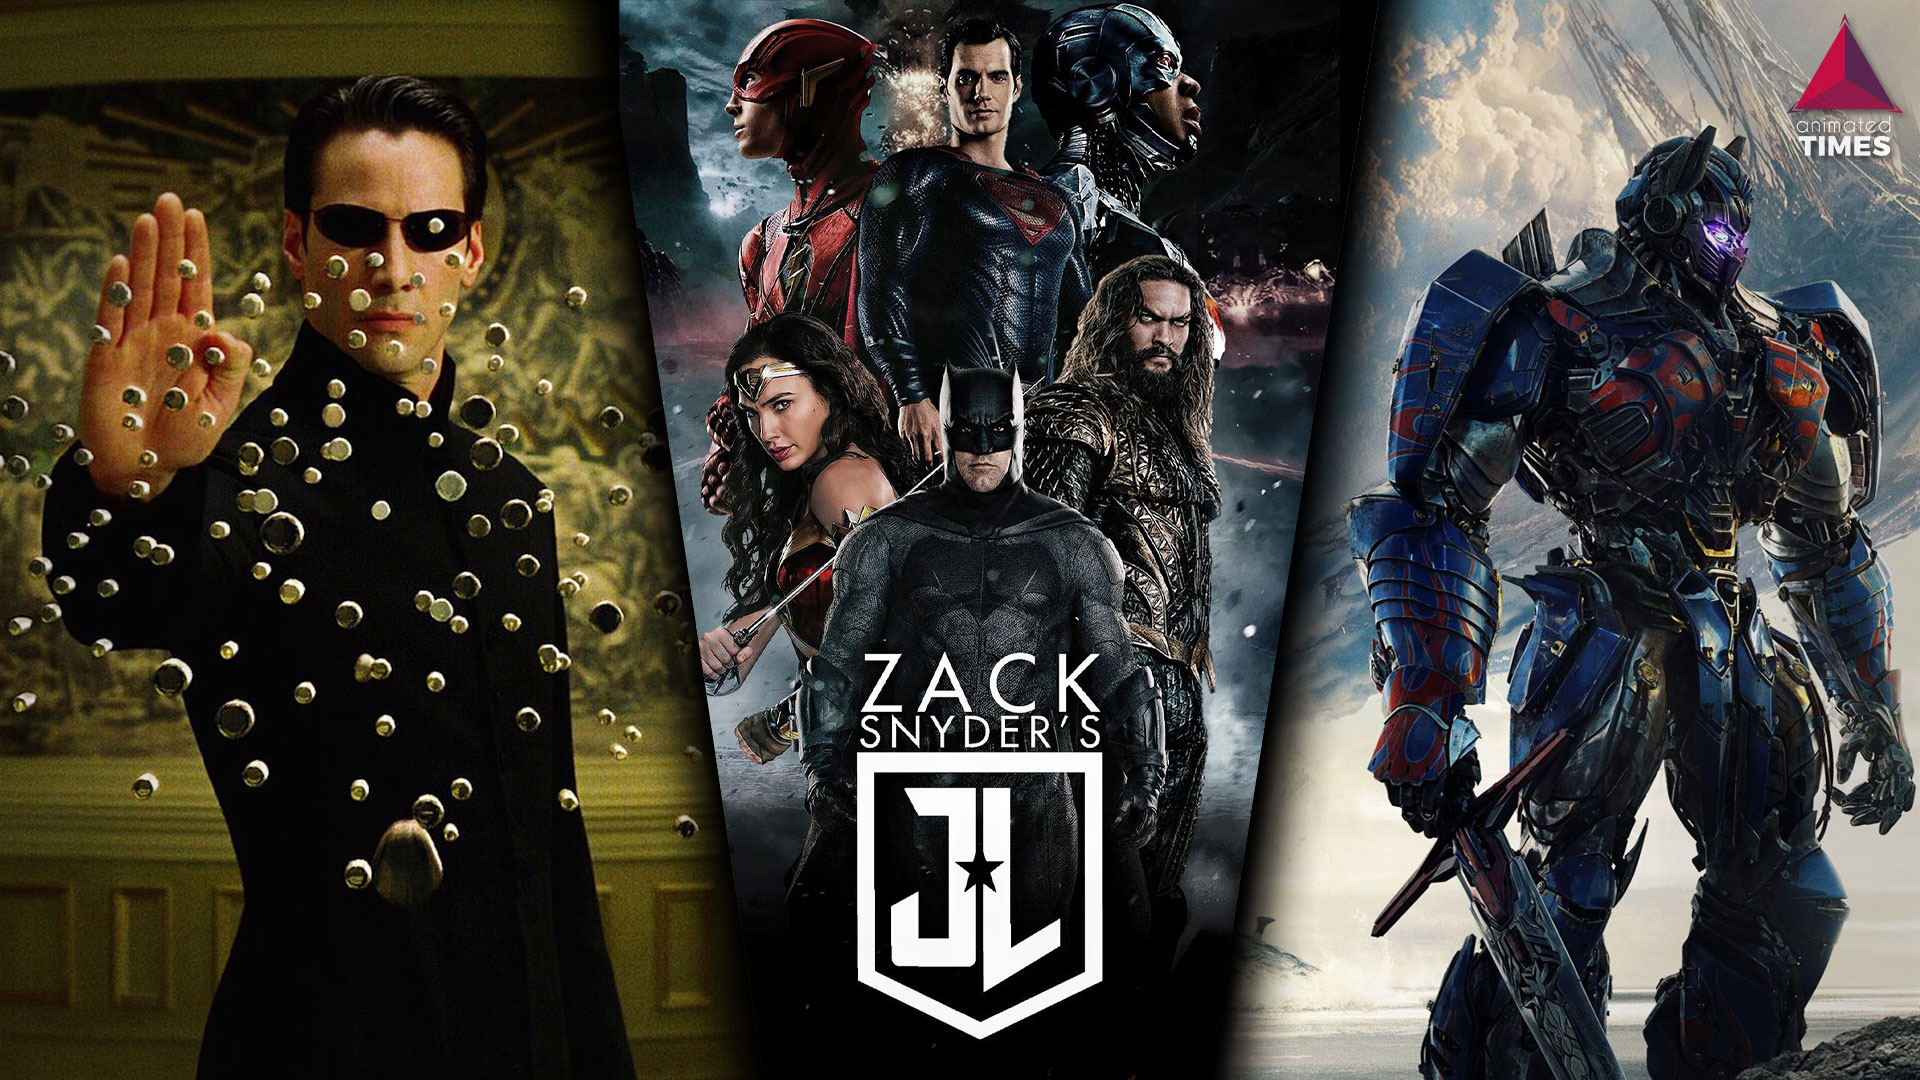 12 Movie Franchises That Should Be ‘Snyderized’ After Zack Snyder’s Justice League